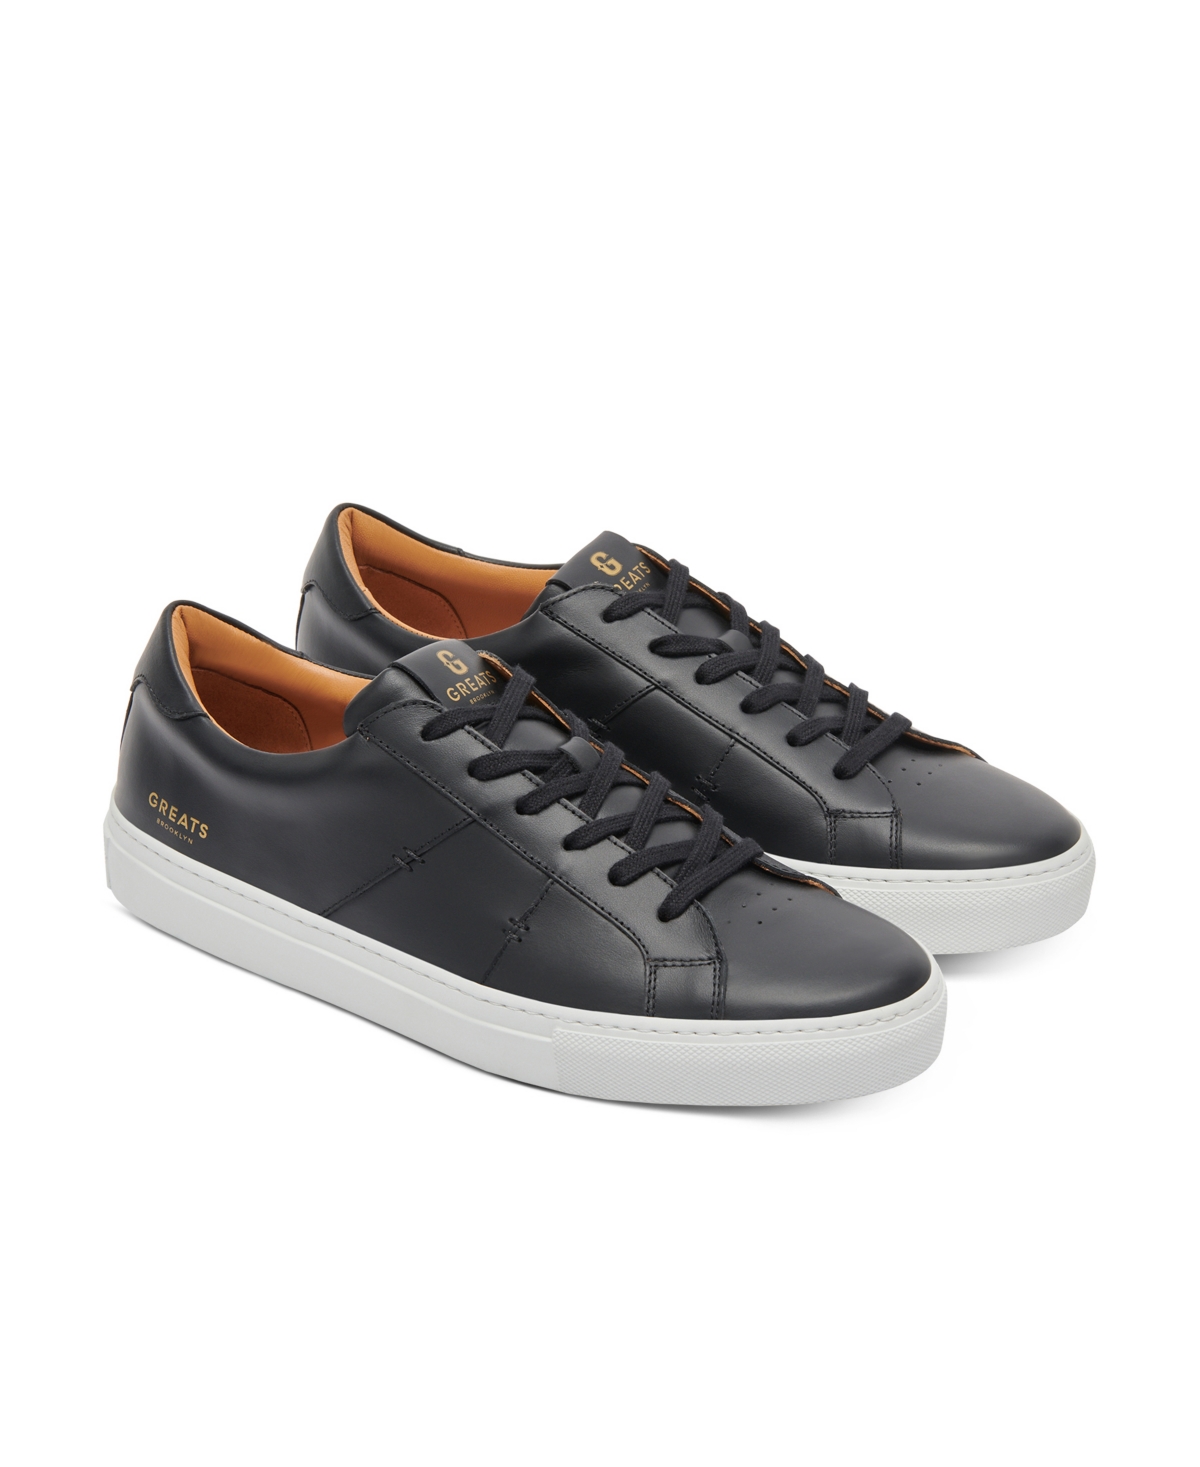 Men's Royale 2.0 Leather Sneakers - Blue